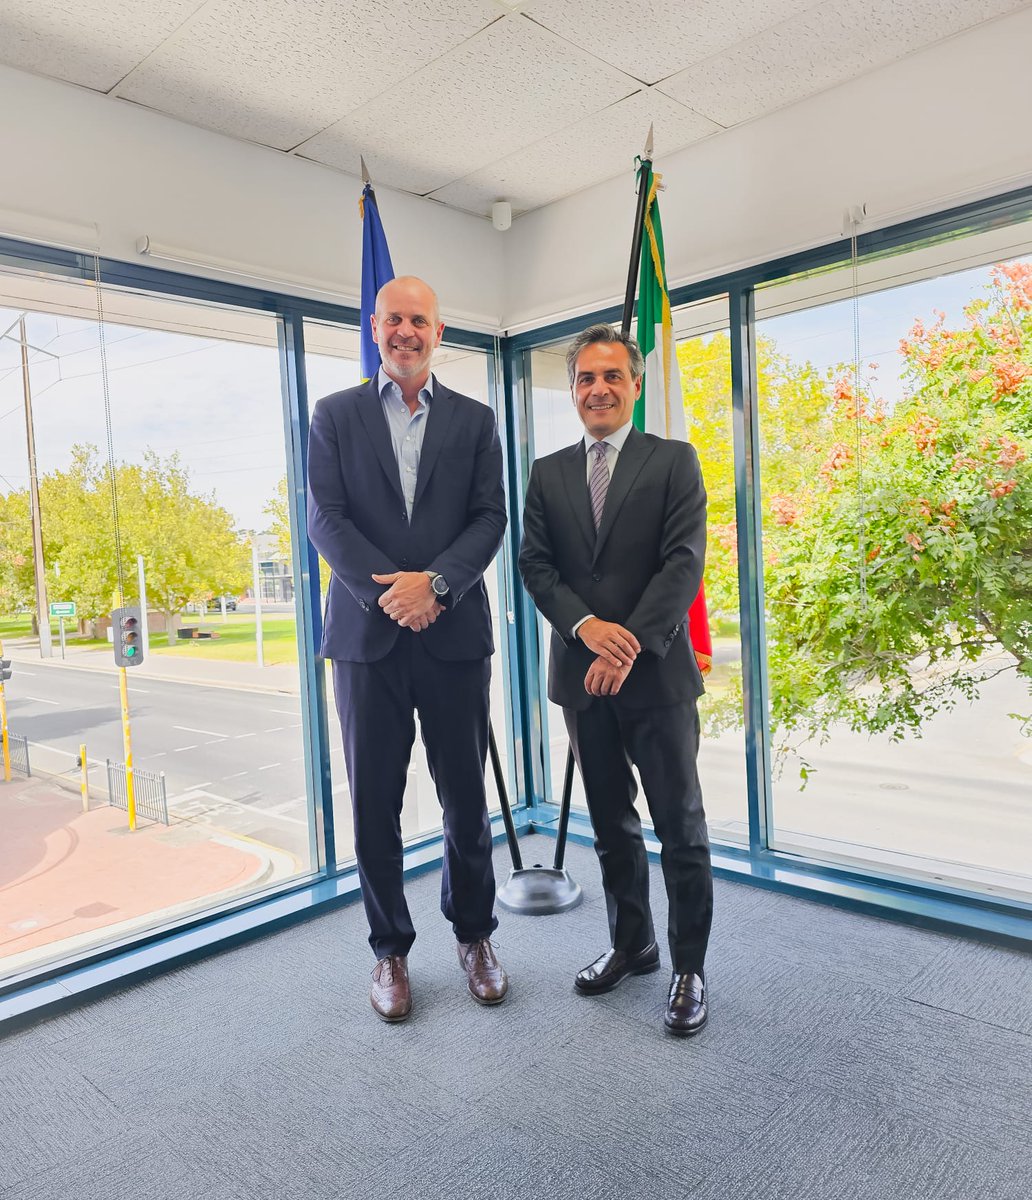 The Consul of Italy, Ernesto Pianelli, had the recent pleasure of meeting with Marco Fontana, Managing Director of Ghella Australia, an internationally renowned Italian construction company, to discuss potential investment opportunities in SA.